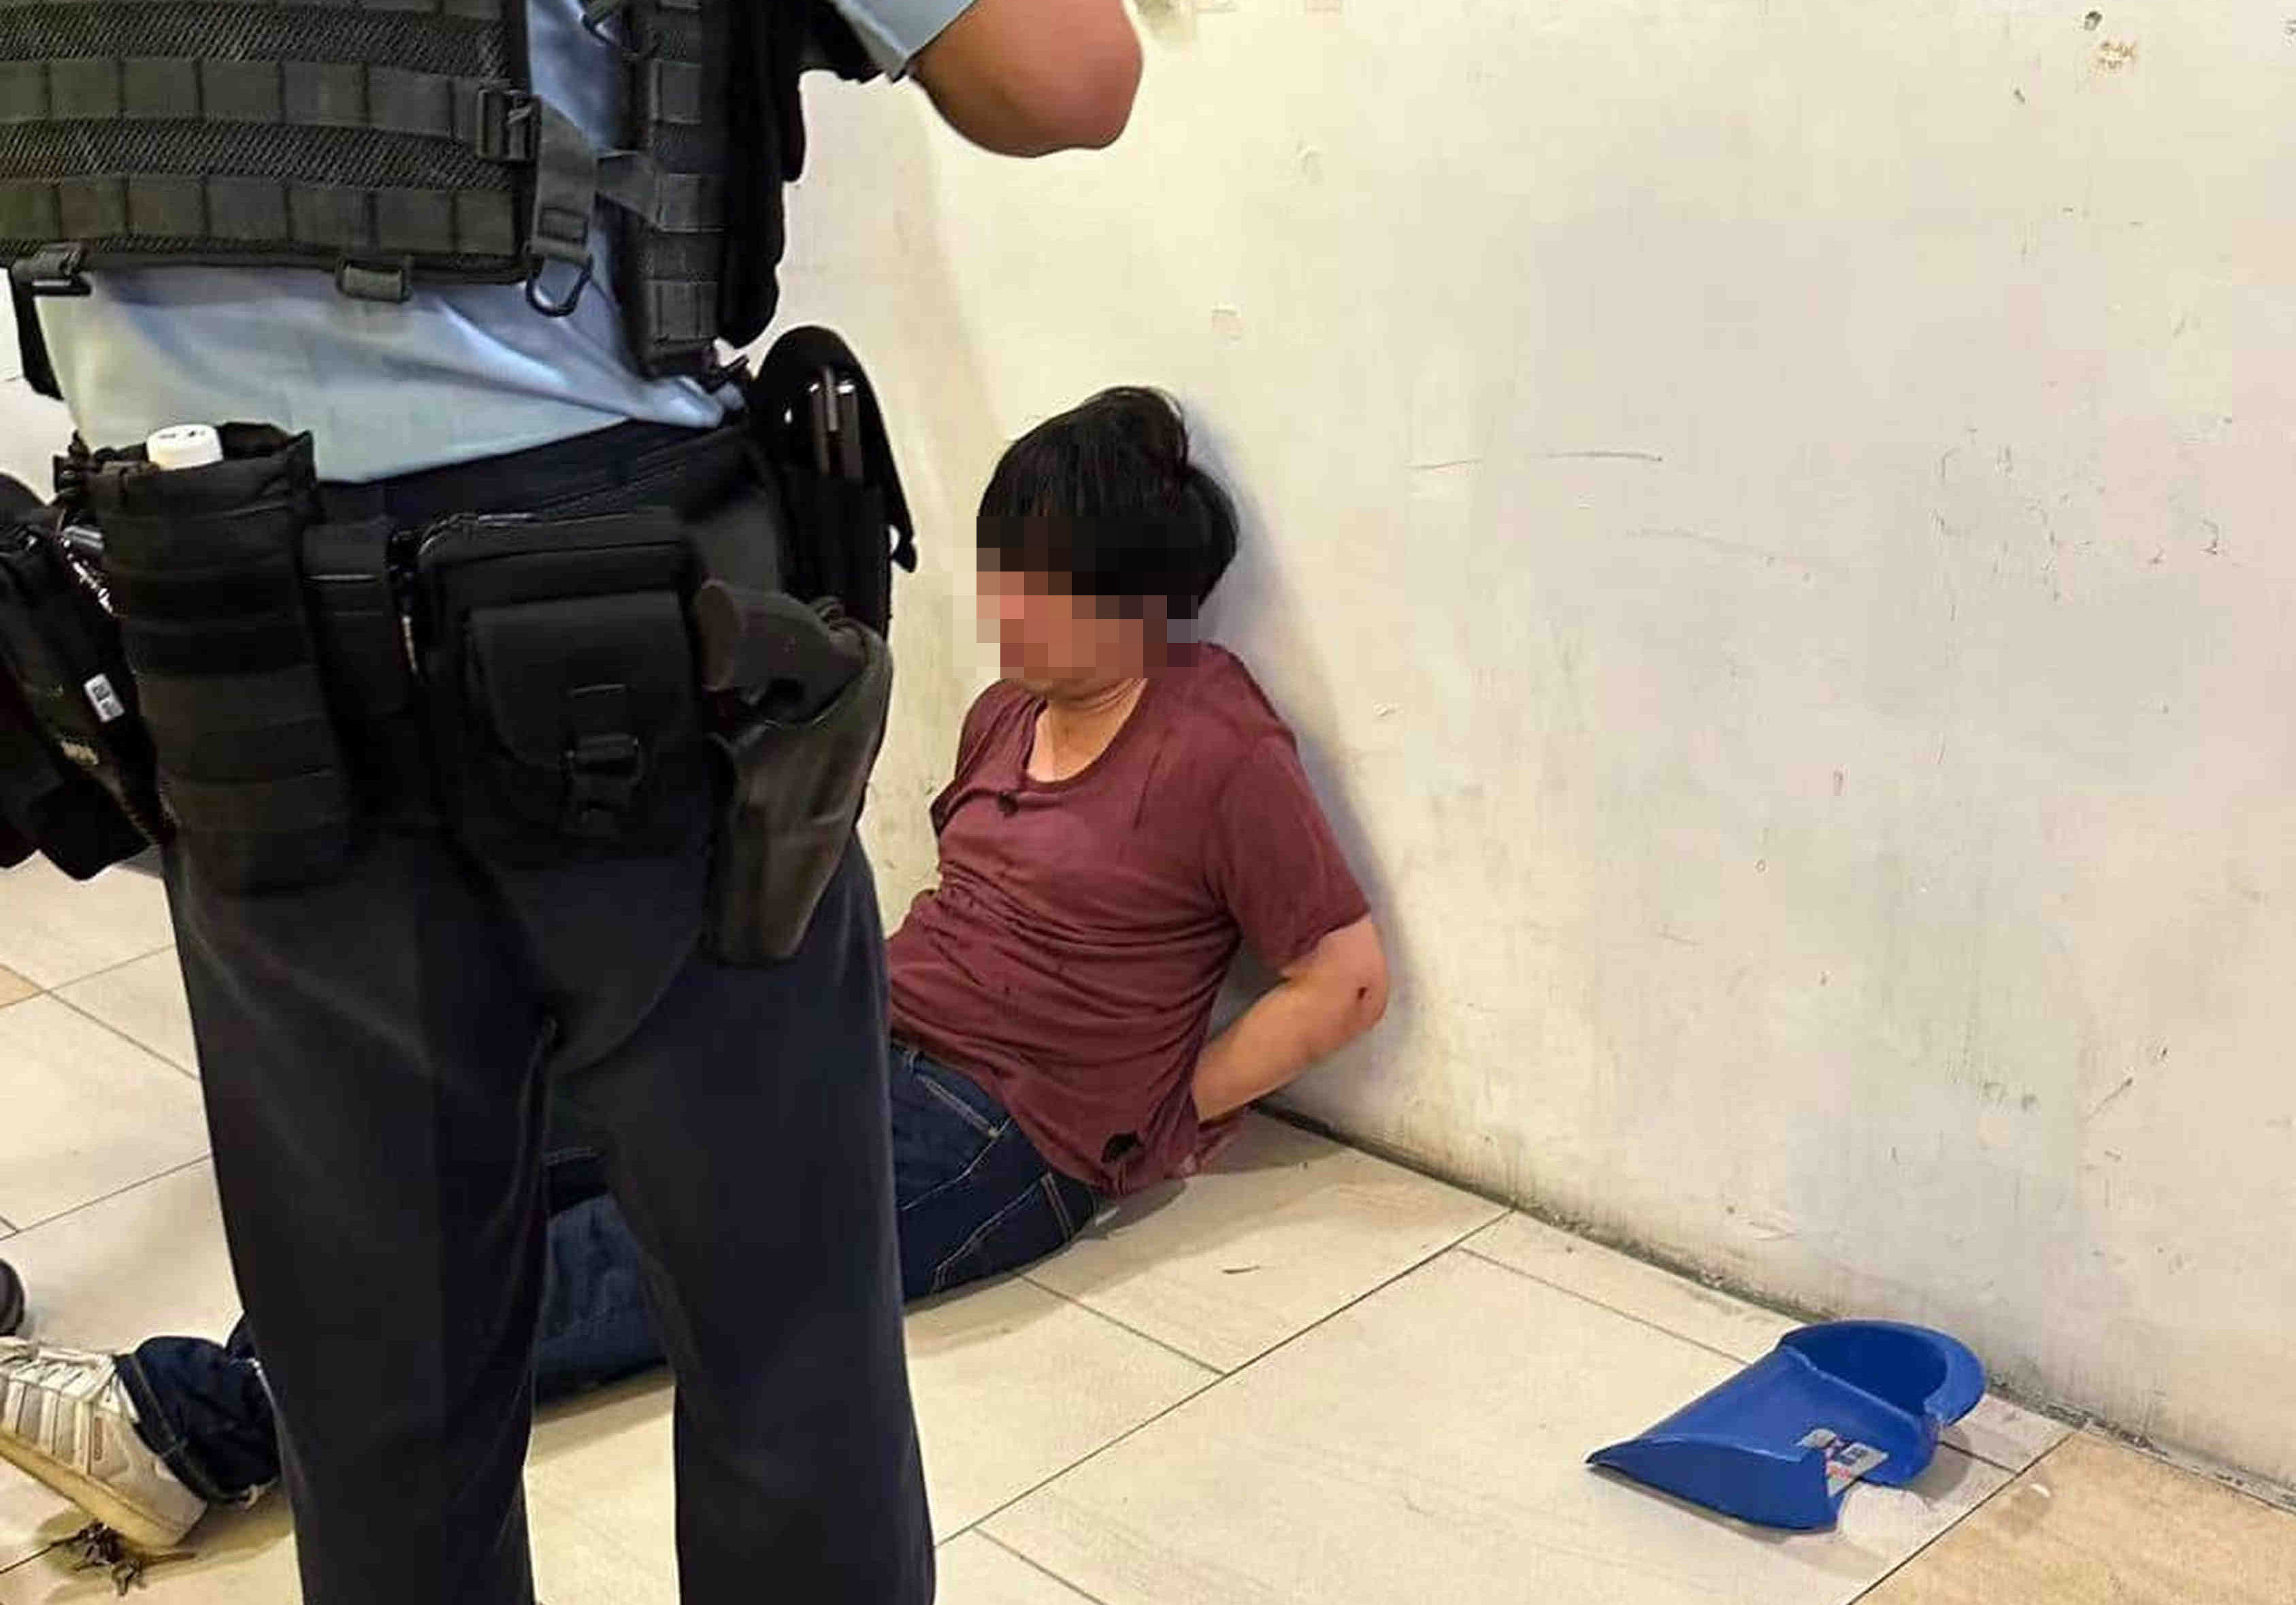 The suspect was subdued after a fierce struggle with people in the shopping centre. Photo: Handout